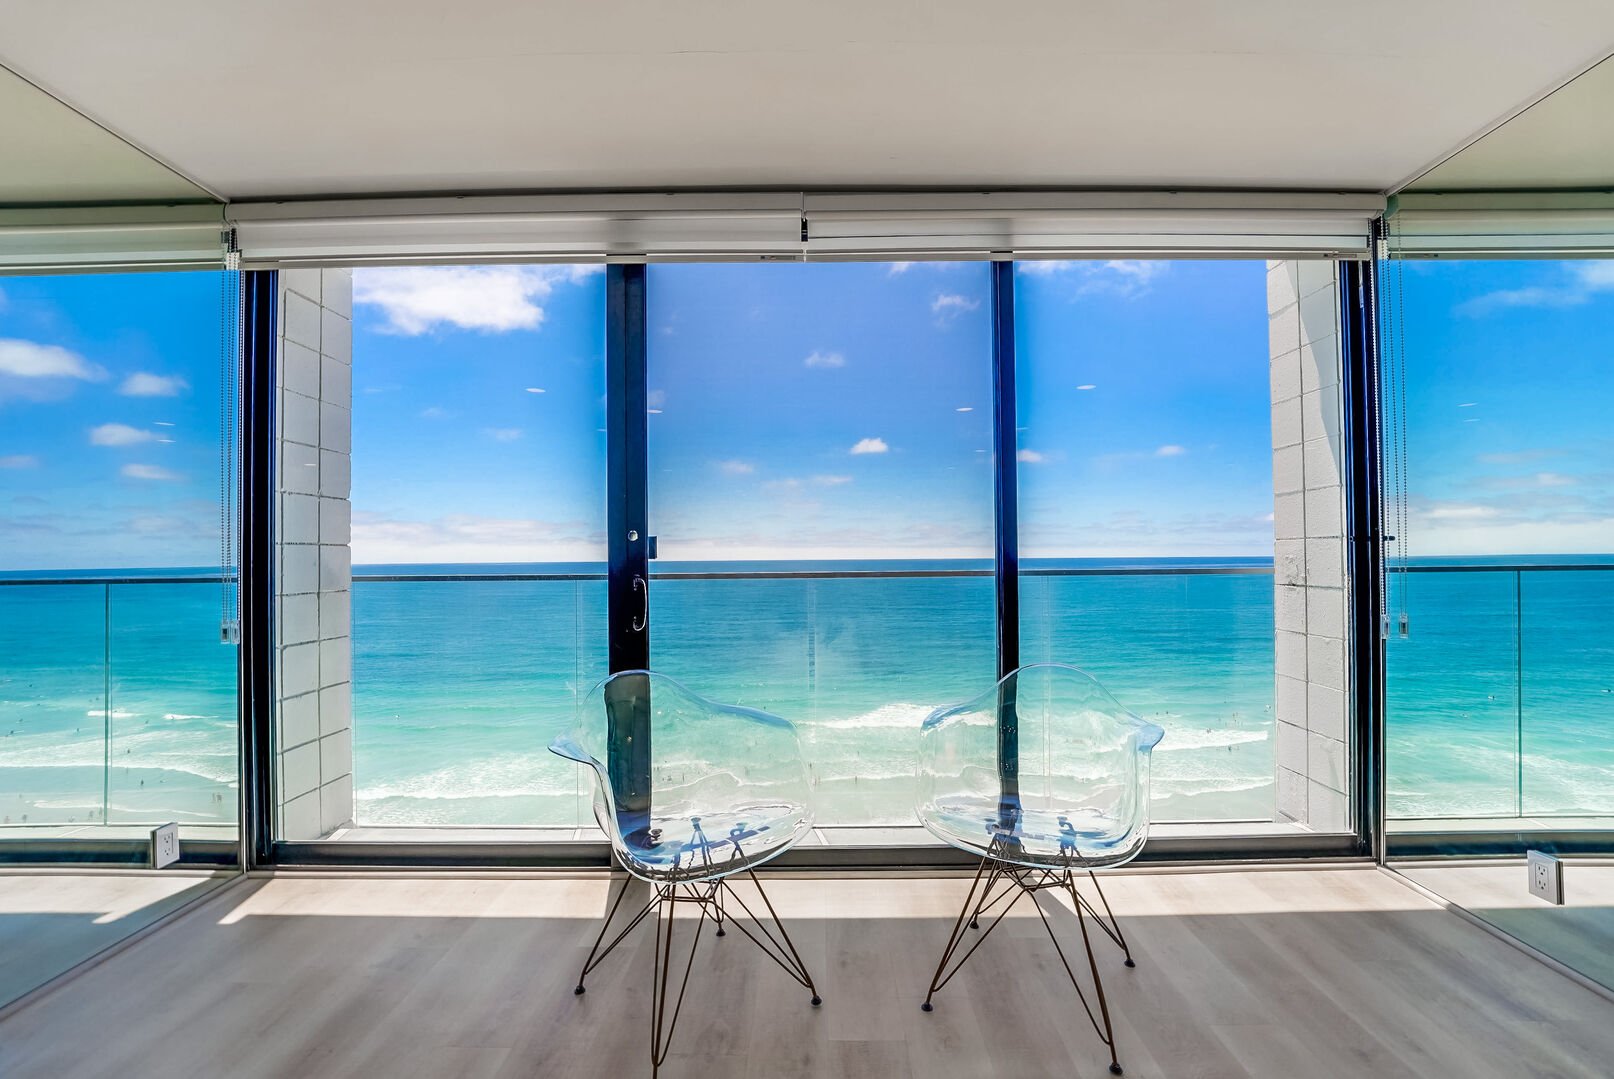 Floor to ceiling windows to the ocean! The sliding door opens to welcome in the sea breeze. Balcony area is not for sitting, view only!